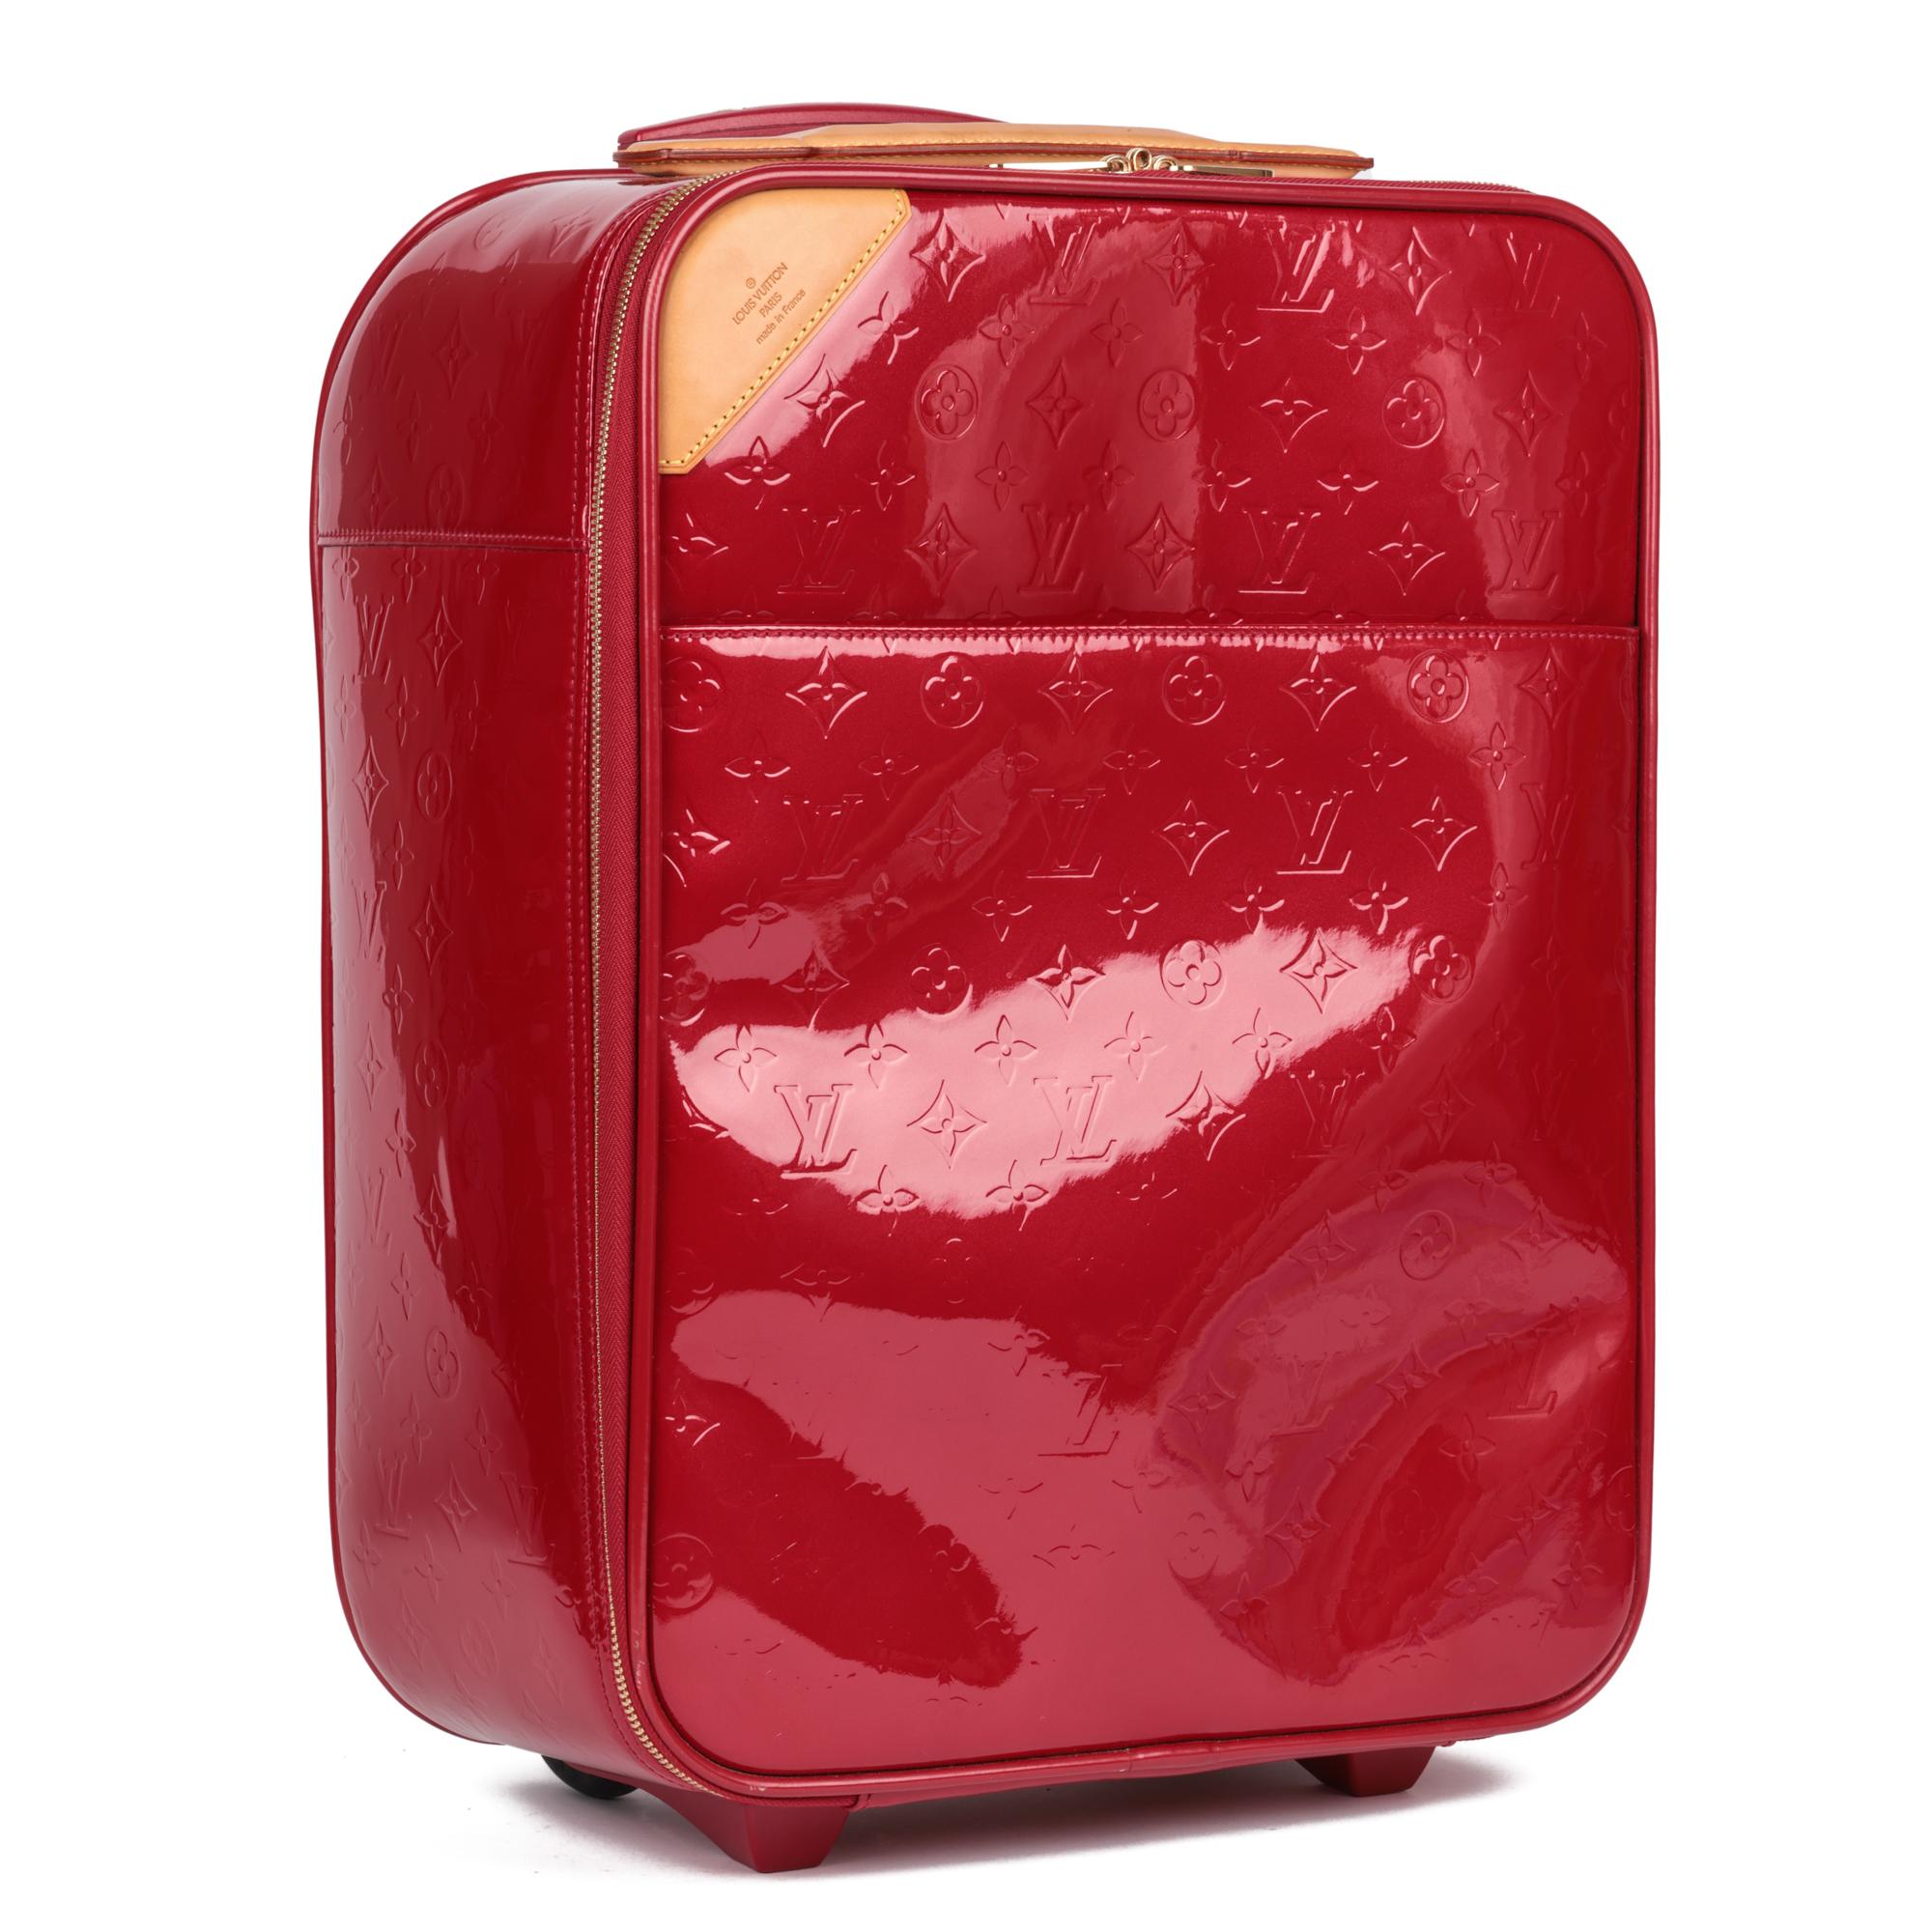 Louis Vuitton Red Suitcase - 8 For Sale on 1stDibs